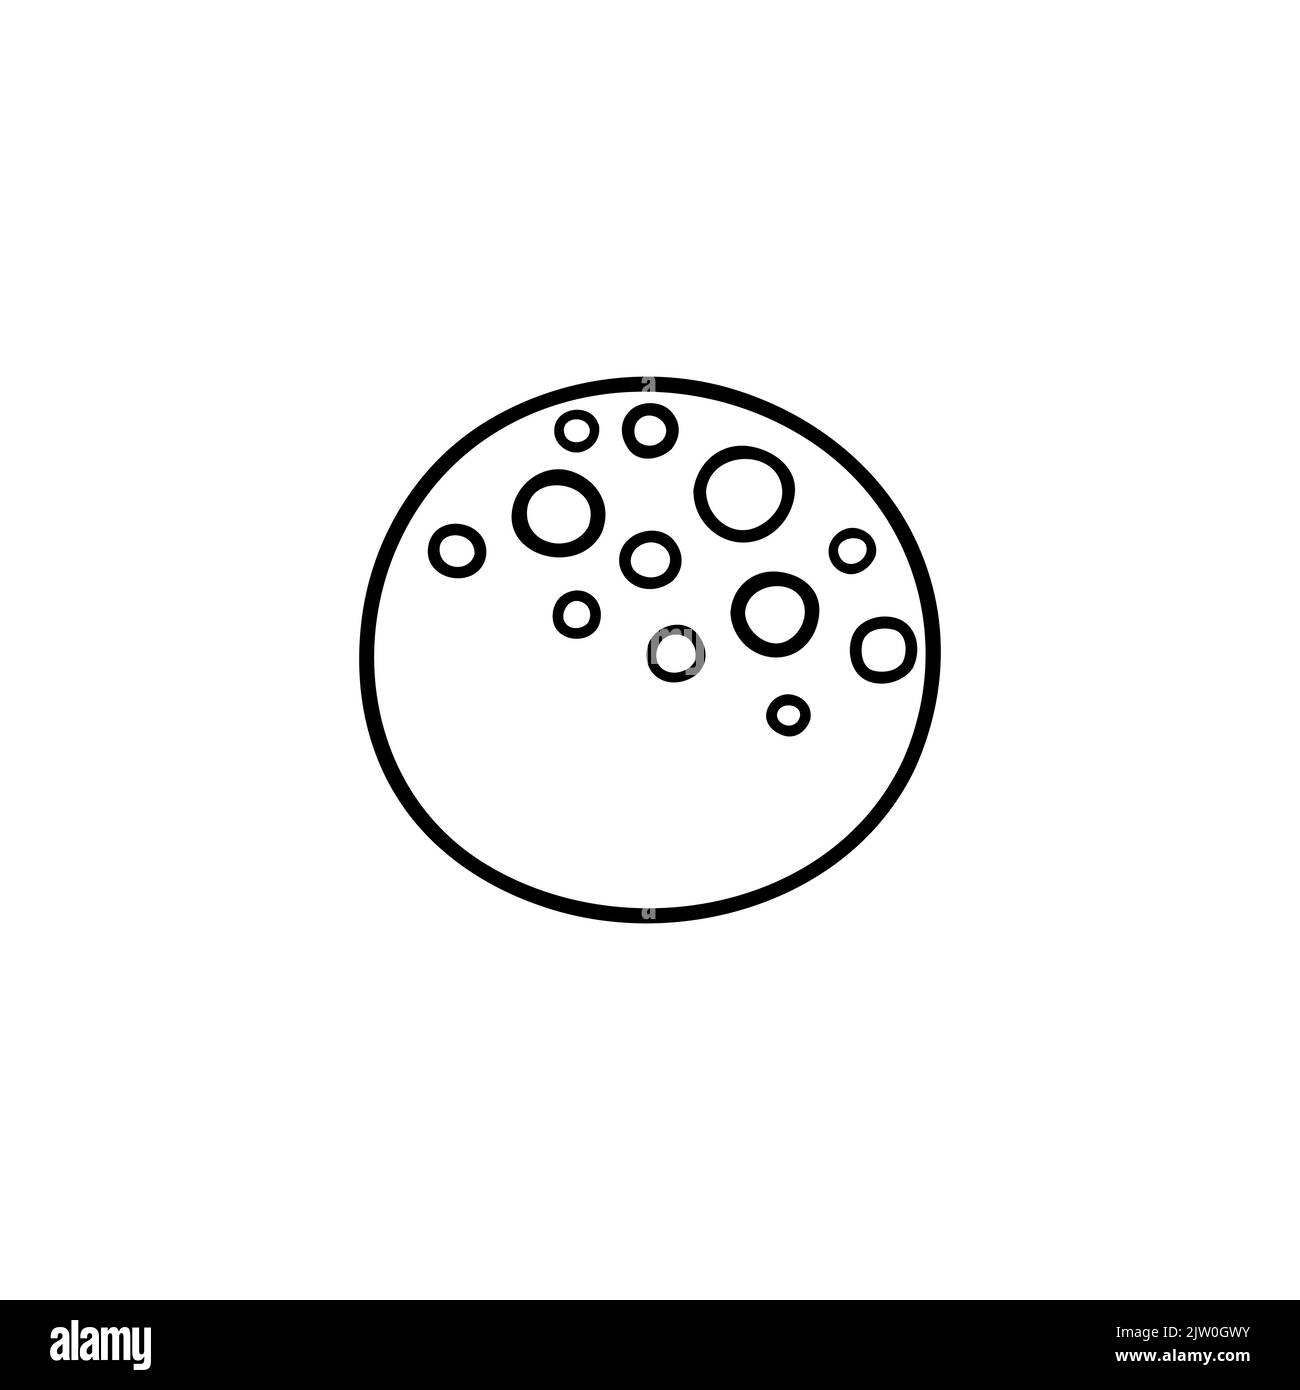 Doodle outline moon icon isolated on white background. Stock Vector